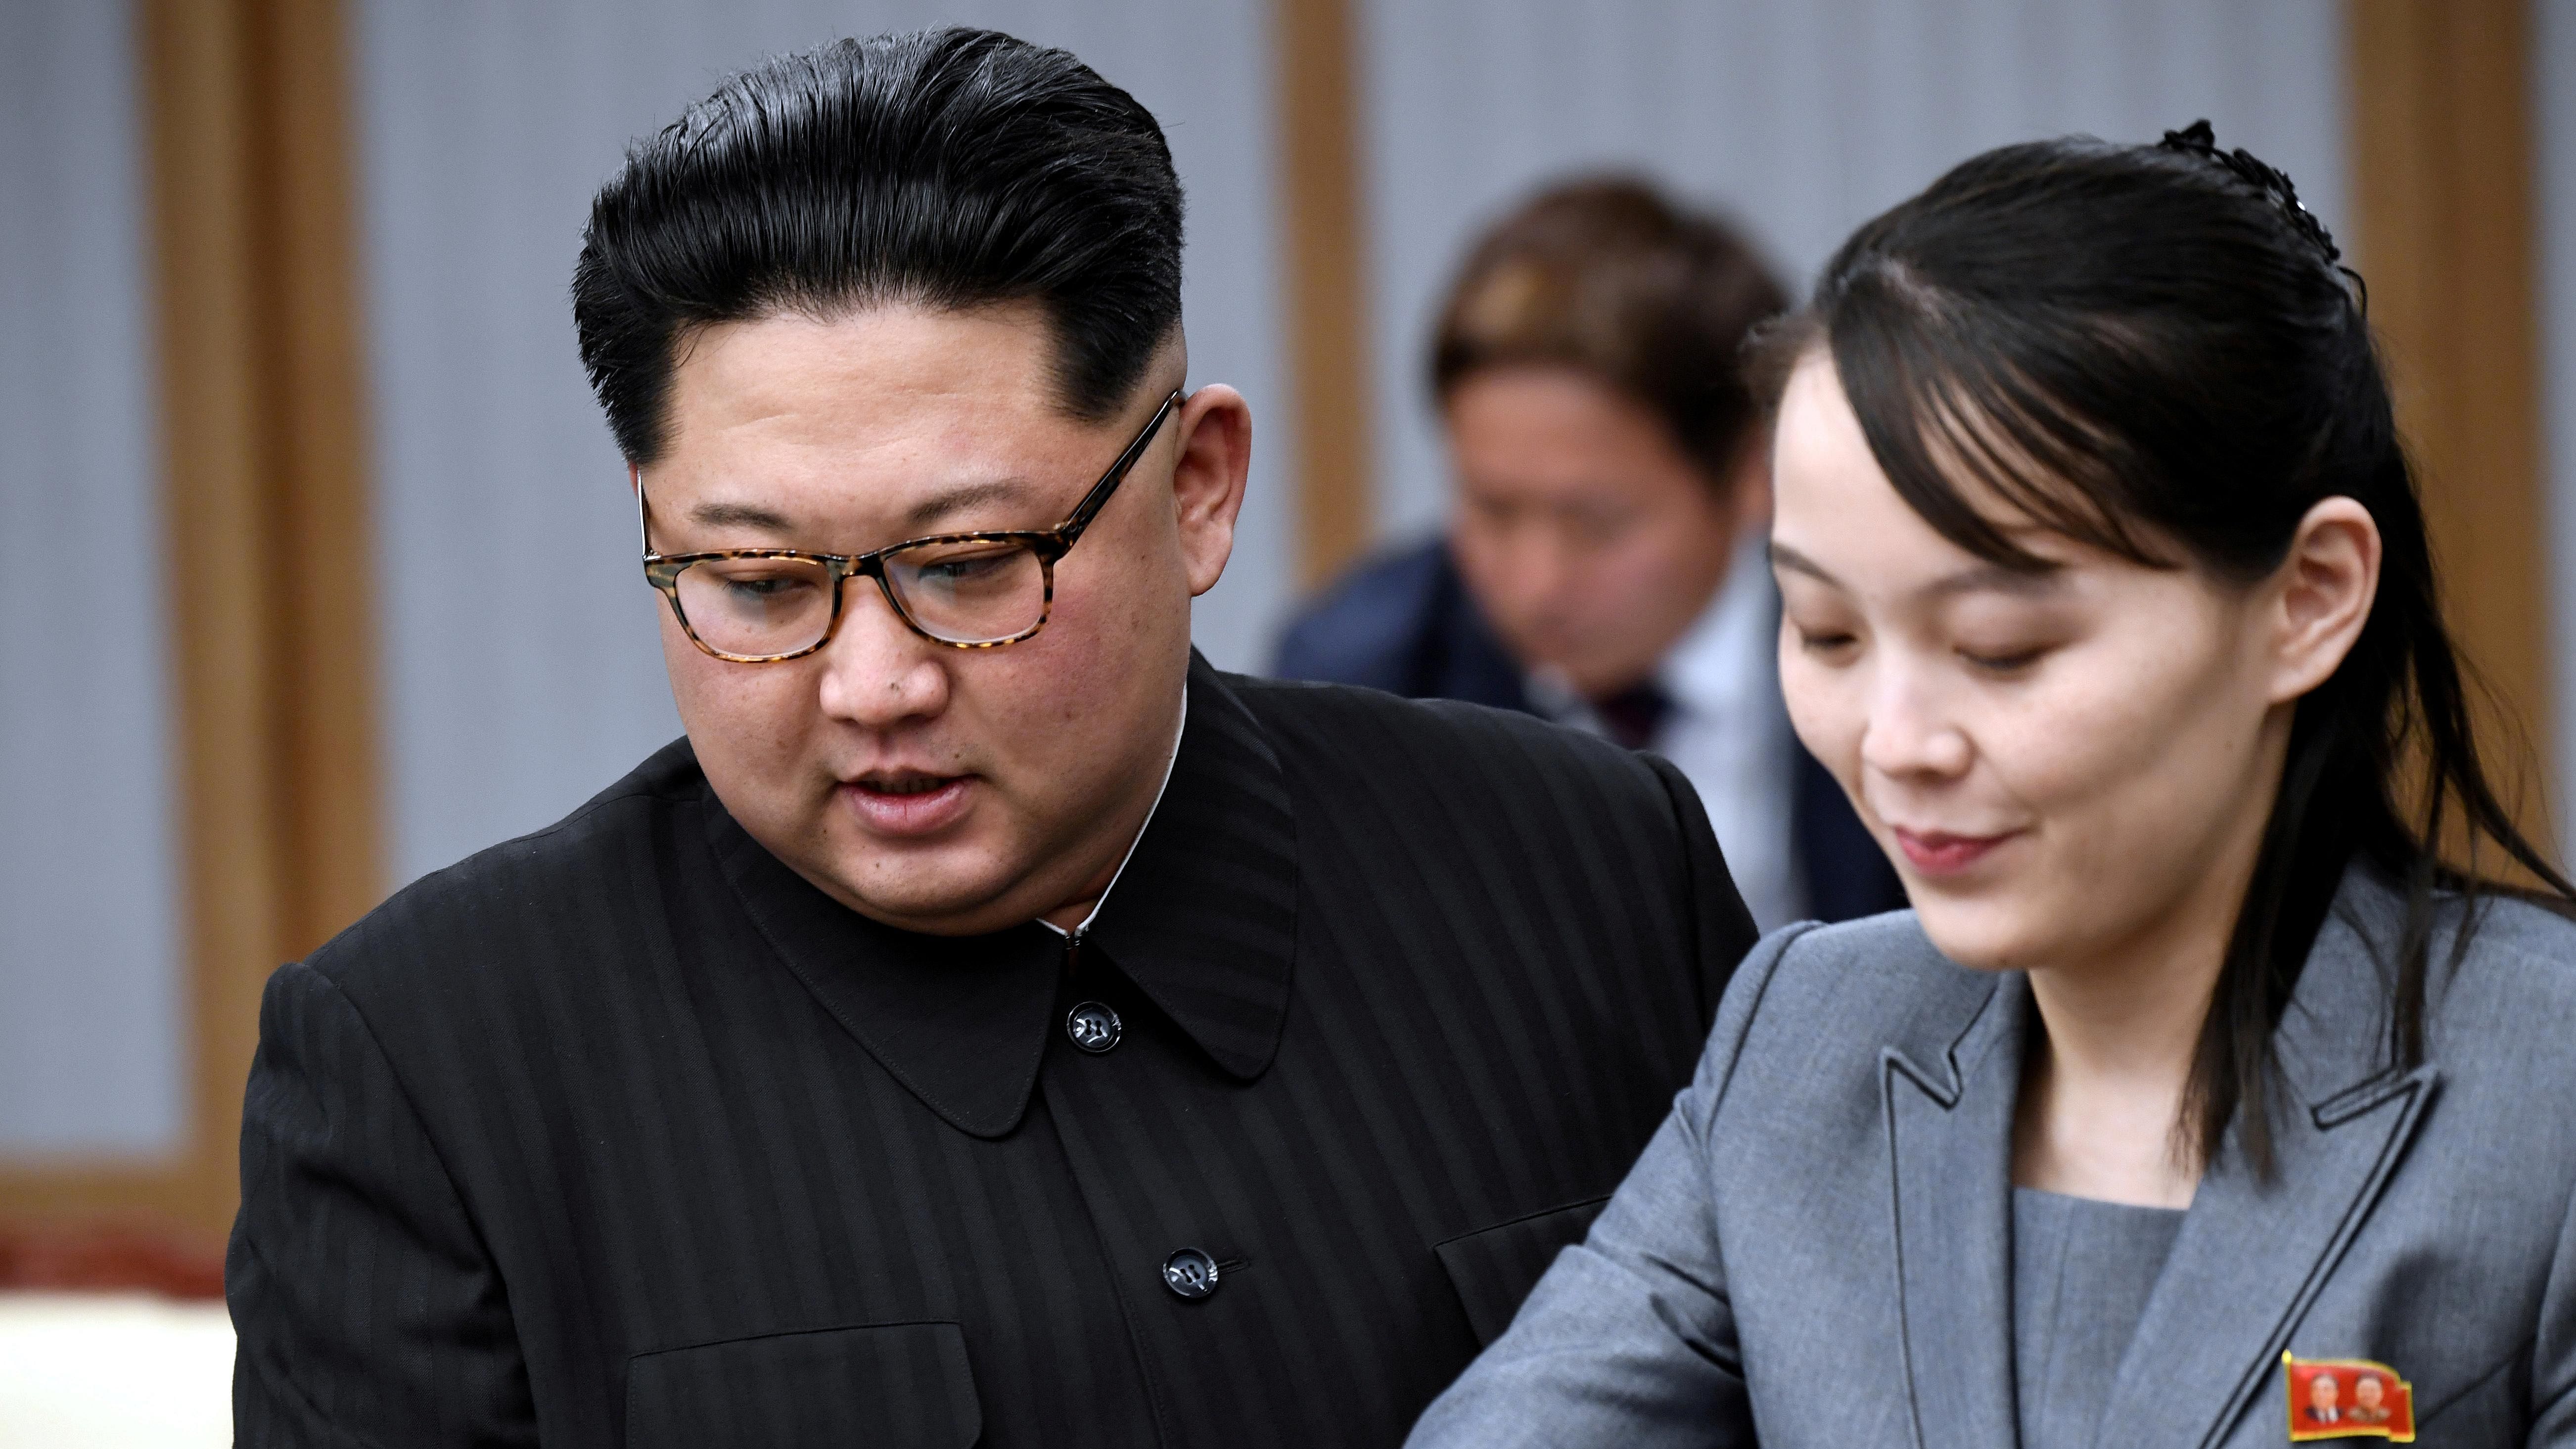 North Korean leader Kim Jong Un and his sister Kim Yo Jong attend a meeting with South Korean President Moon Jae-in at the Peace House at the truce village of Panmunjom inside the demilitarized zone separating the two Koreas, South Korea, April 27, 2018. Credit: Reuters File Photo